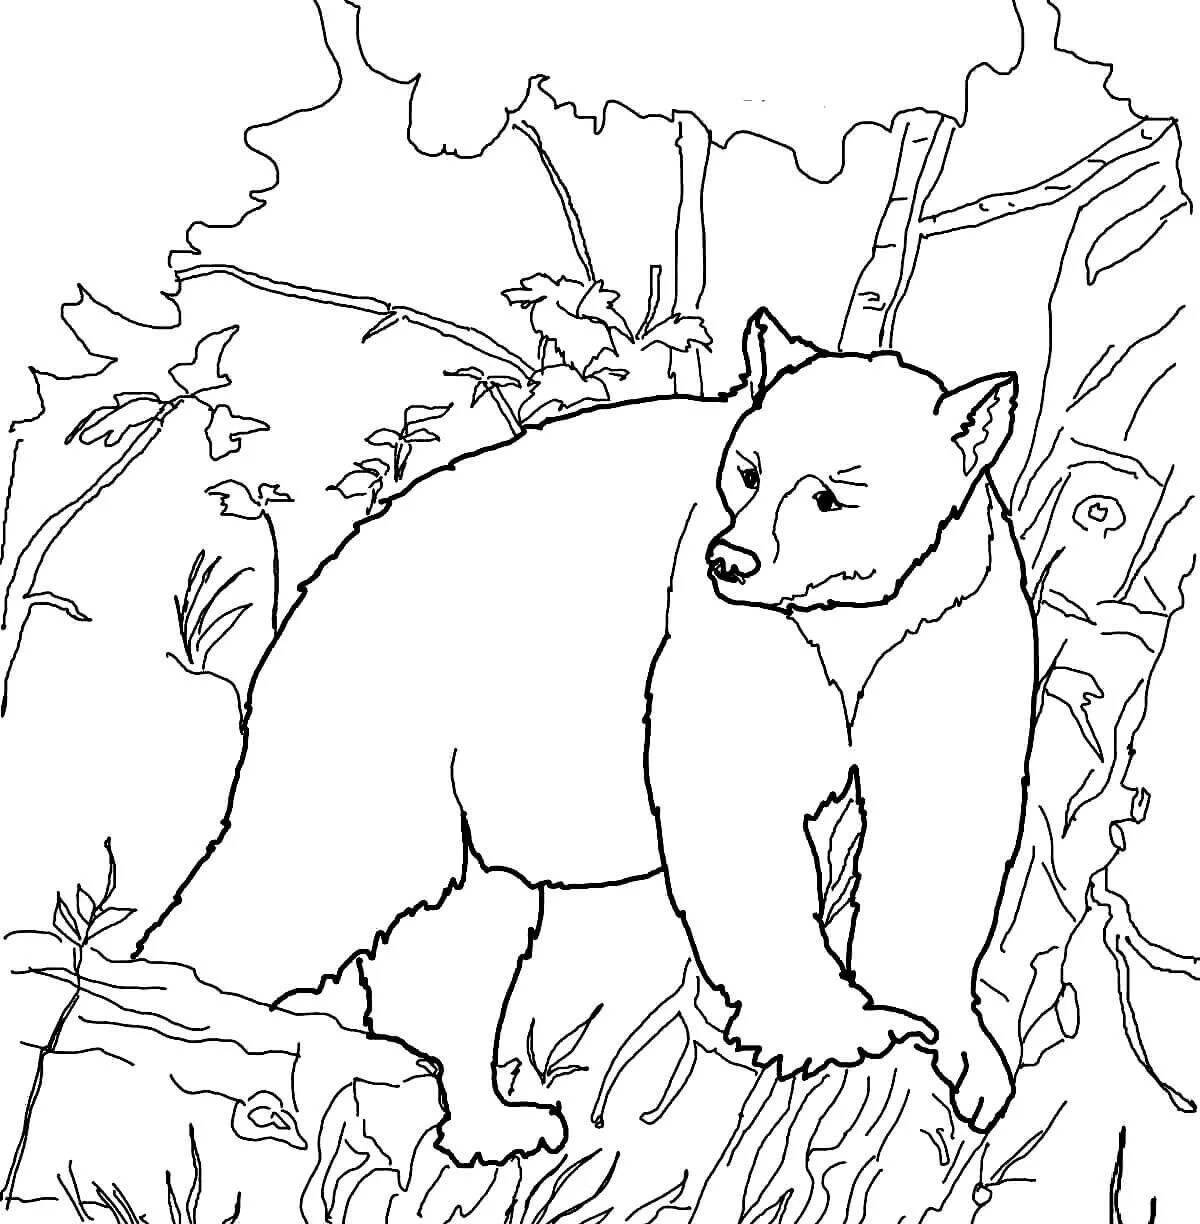 Bear in the forest #12